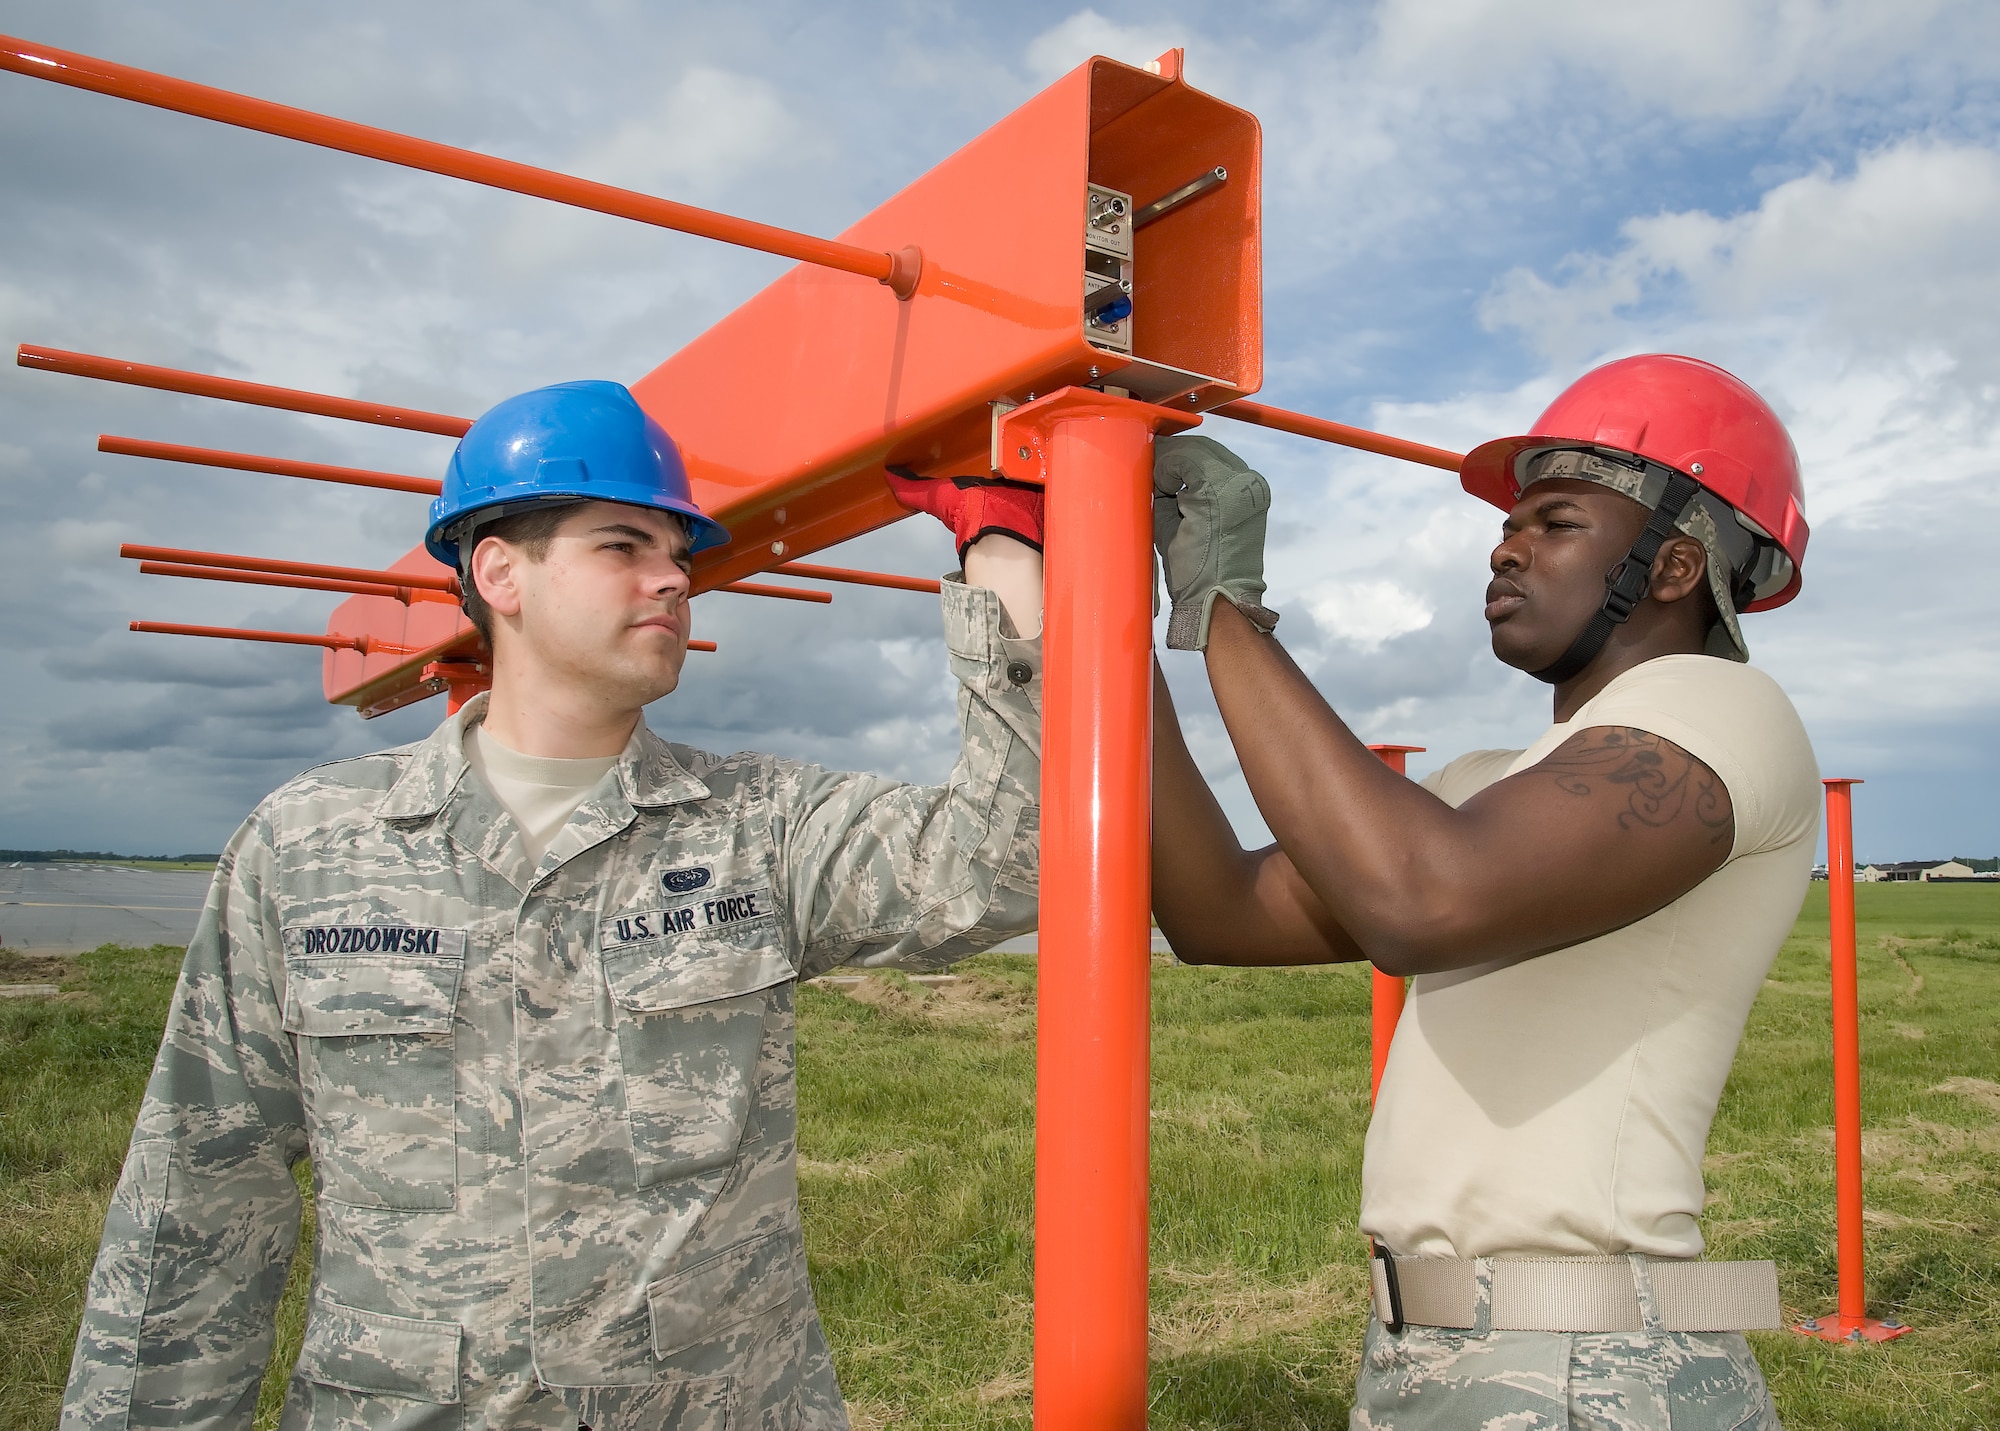 Airman 1st Class Michael Drozdowski (left) and A1C Jonathan Gary, 436th Communications Squadron, work together to install bolts on an instrument landing system (ILS) antenna at the approach end of runway 01 at Dover Air Force base on May 23, 2013 at Dover Air Force Base, Del. (U.S. Air Force photo/Greg L. Davis)